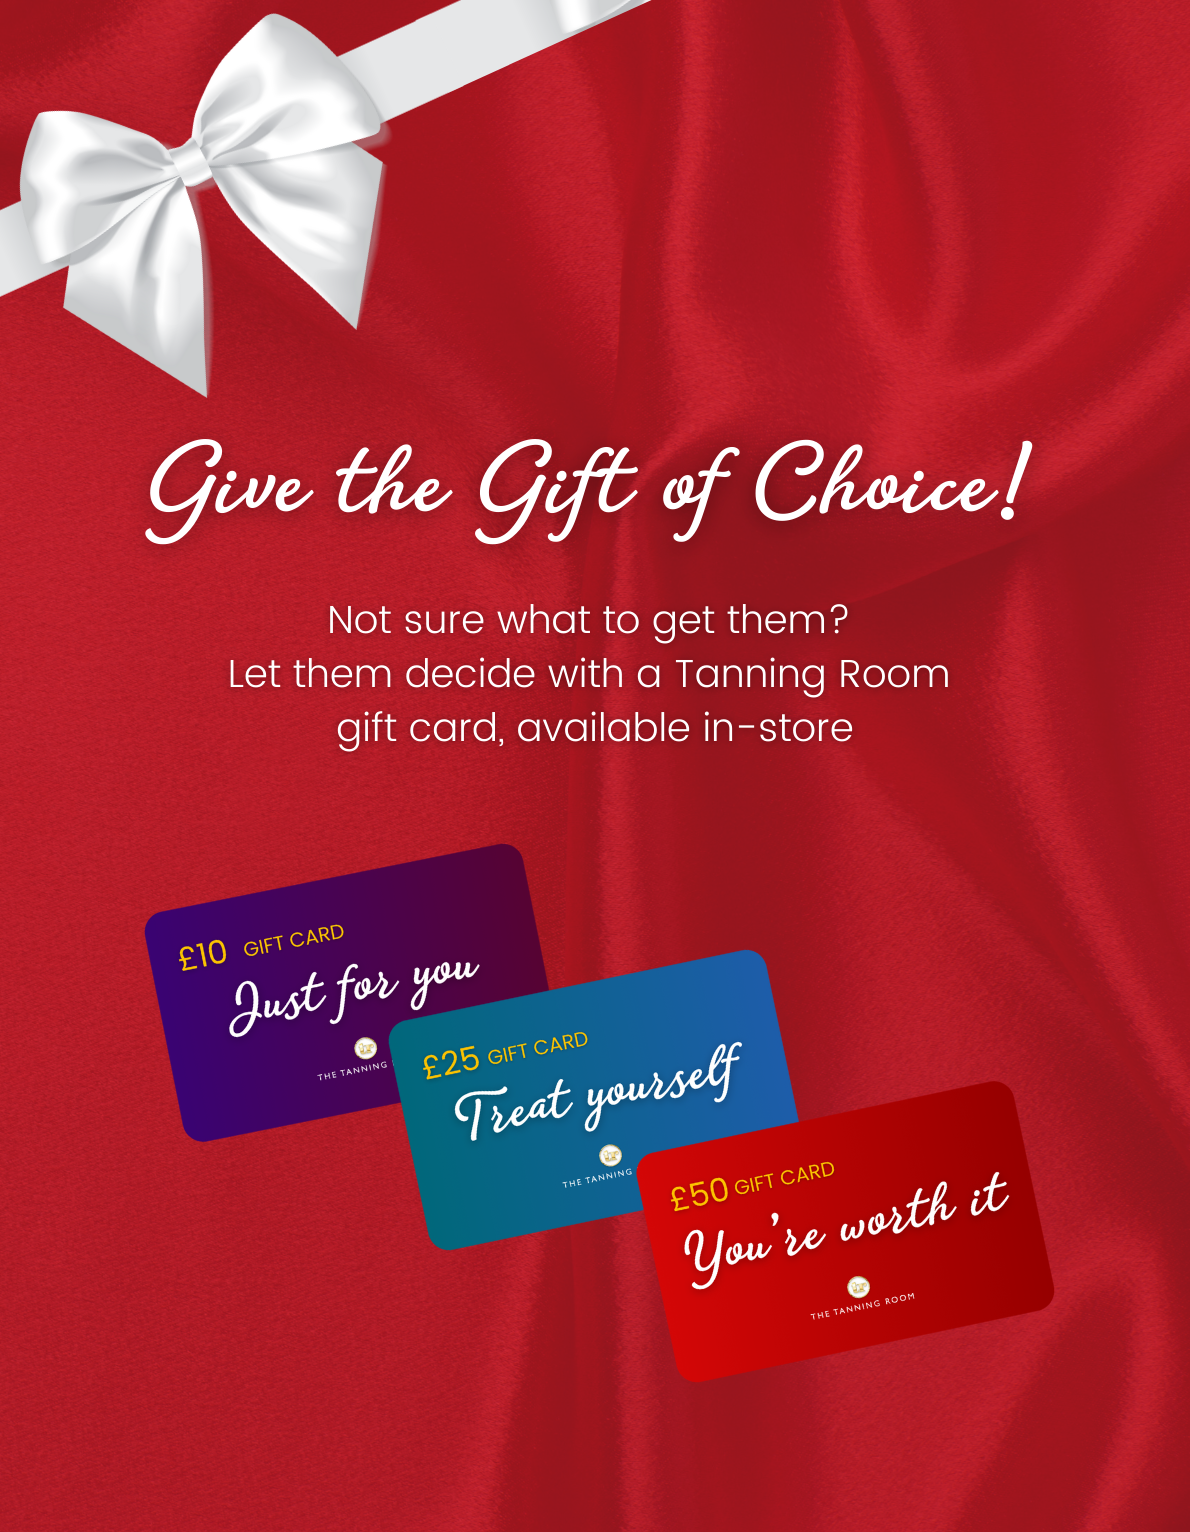 Give the gift of choice with a Tanning Room gift card, available in-store